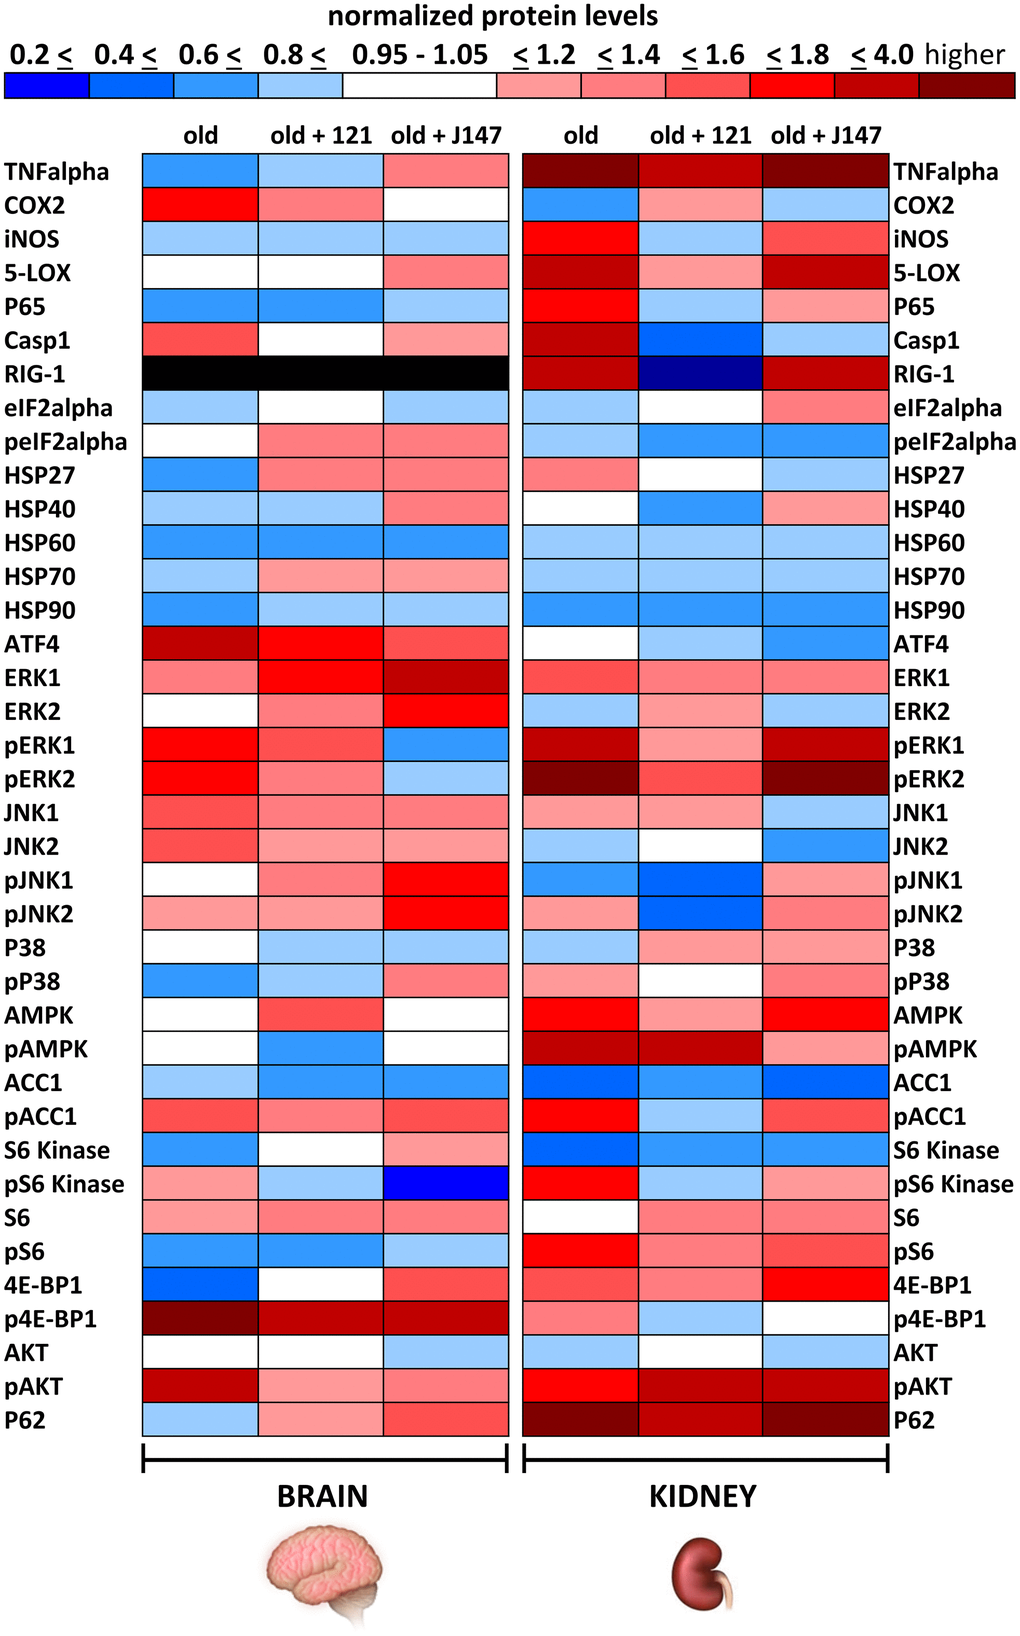 J147 and CMS121 elicit tissue-specific effects in aged SAMP8 brain and kidney. Heatmap of normalized protein levels in brain and kidney of old untreated and old compound-treated SAMP8 mice. Each non-phosphorylated protein was first normalized to beta-actin and then to its level in the same tissue of young mice. Phosphorylated proteins were first normalized to the total amount of the same non-phosphorylated protein and then to its level in young mice. Blue represents decreased protein levels, red represents increased protein levels, and white represents no change in protein level when compared to young mice. RIG-1 expression was not detectable in brain tissue (black). Mean data are presented (n = 4-6/group).